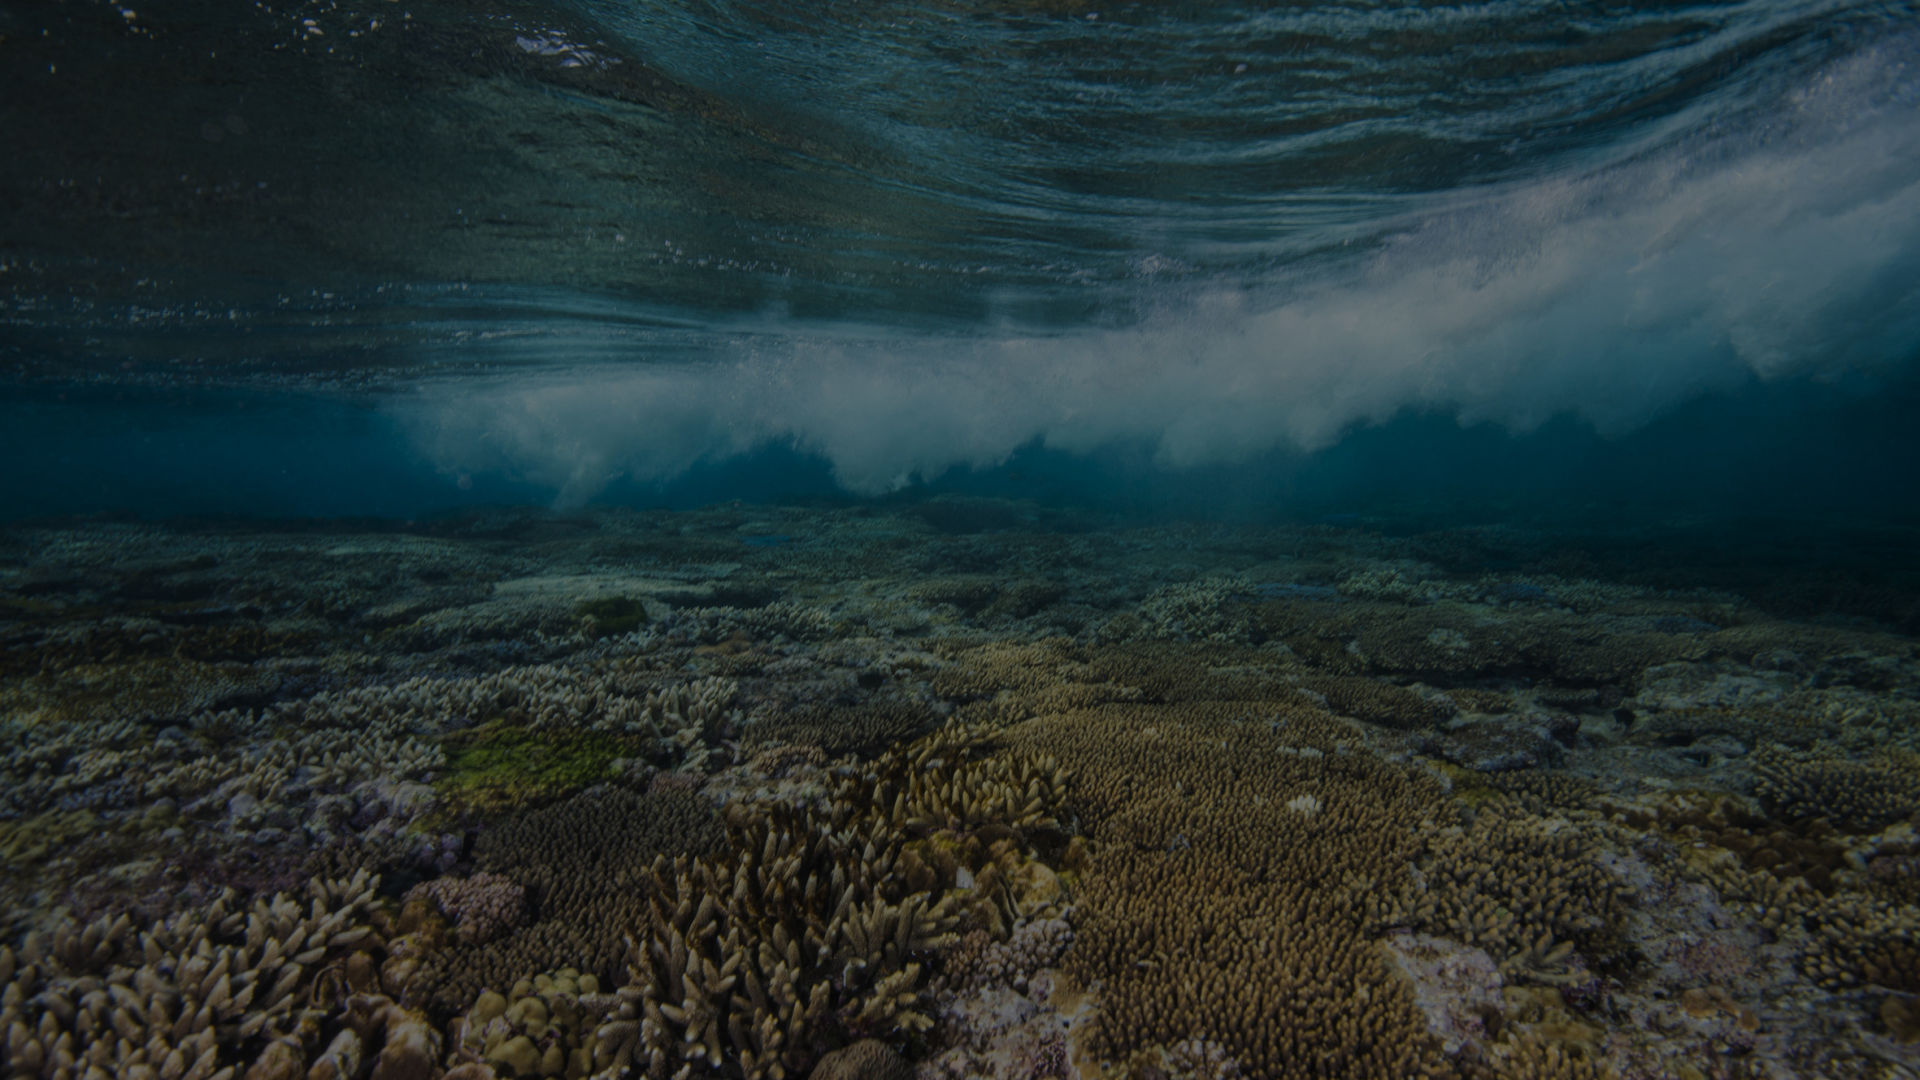 How El Niño impacts the Great Barrier Reef